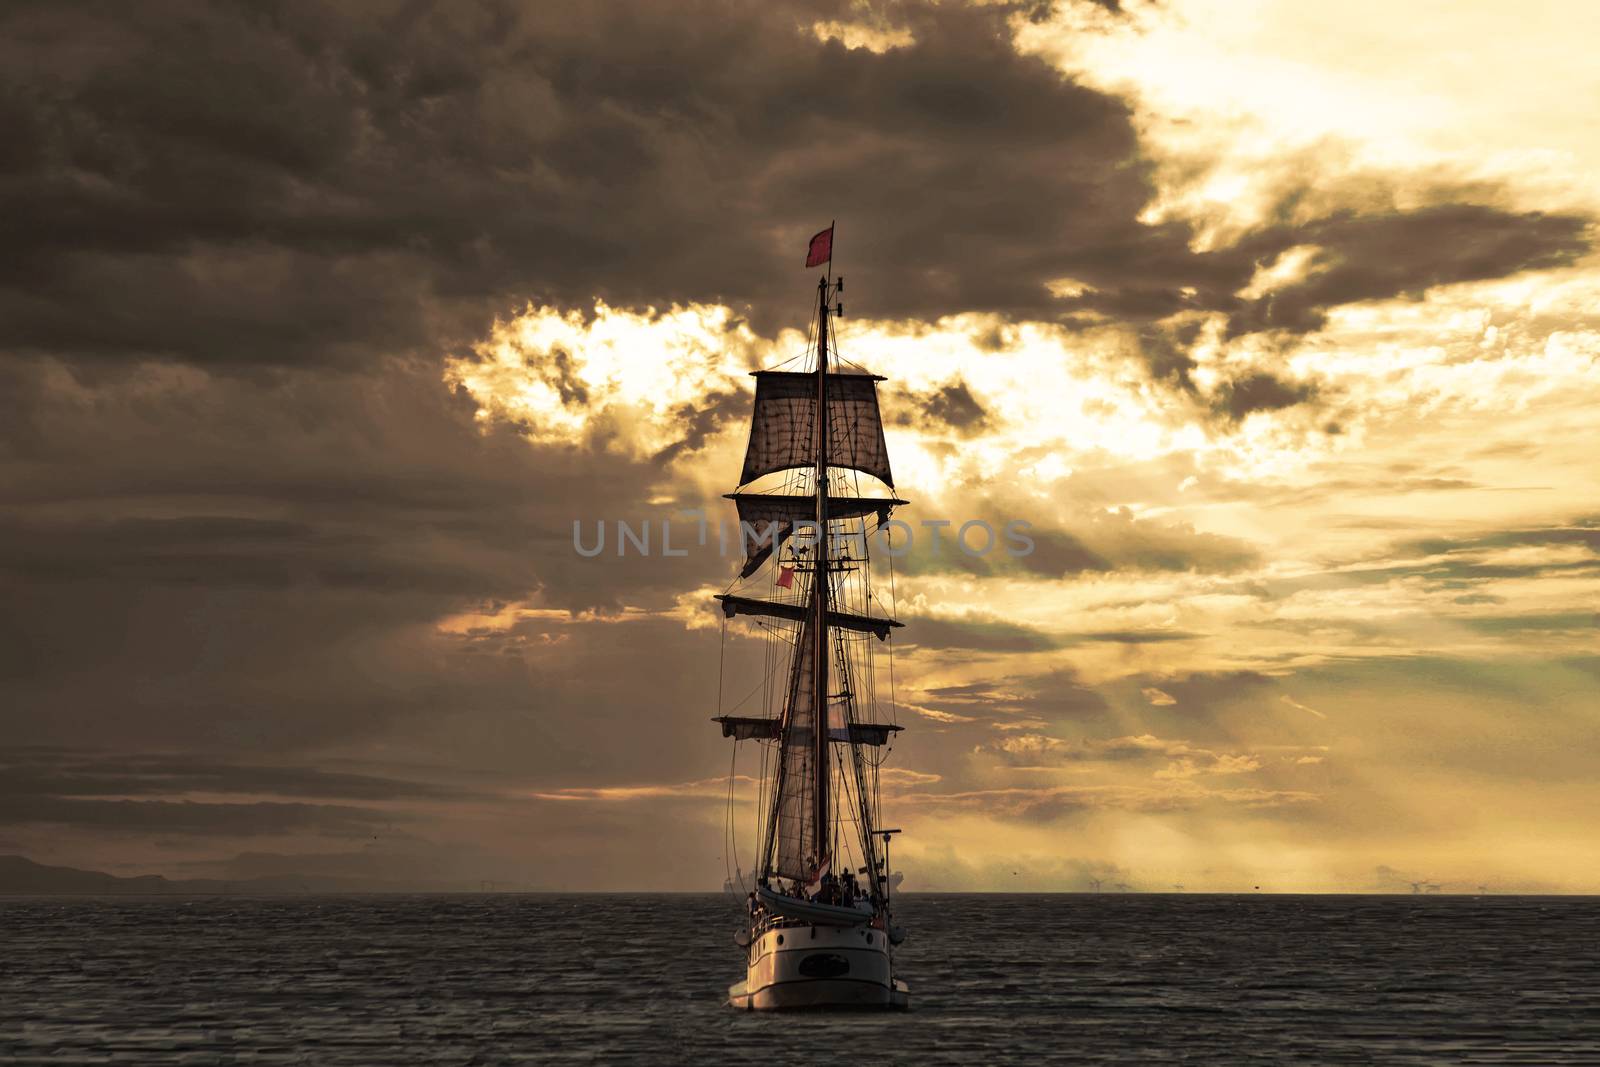 Antique tall ship, vessel leaving the harbor of The Hague, Scheveningen under a warm sunset and golden sky by ankorlight